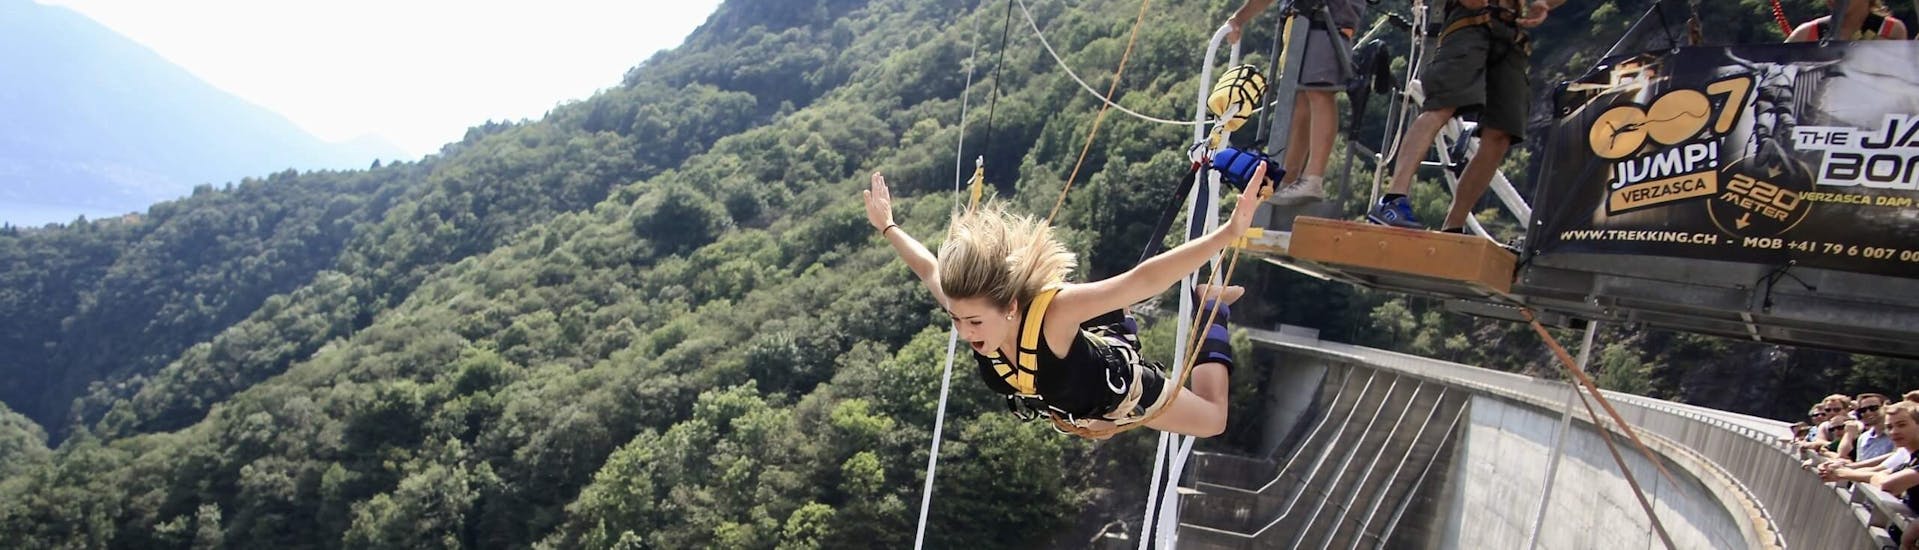 A woman goes bungee jumping "James Bond 007" in Verzasca.